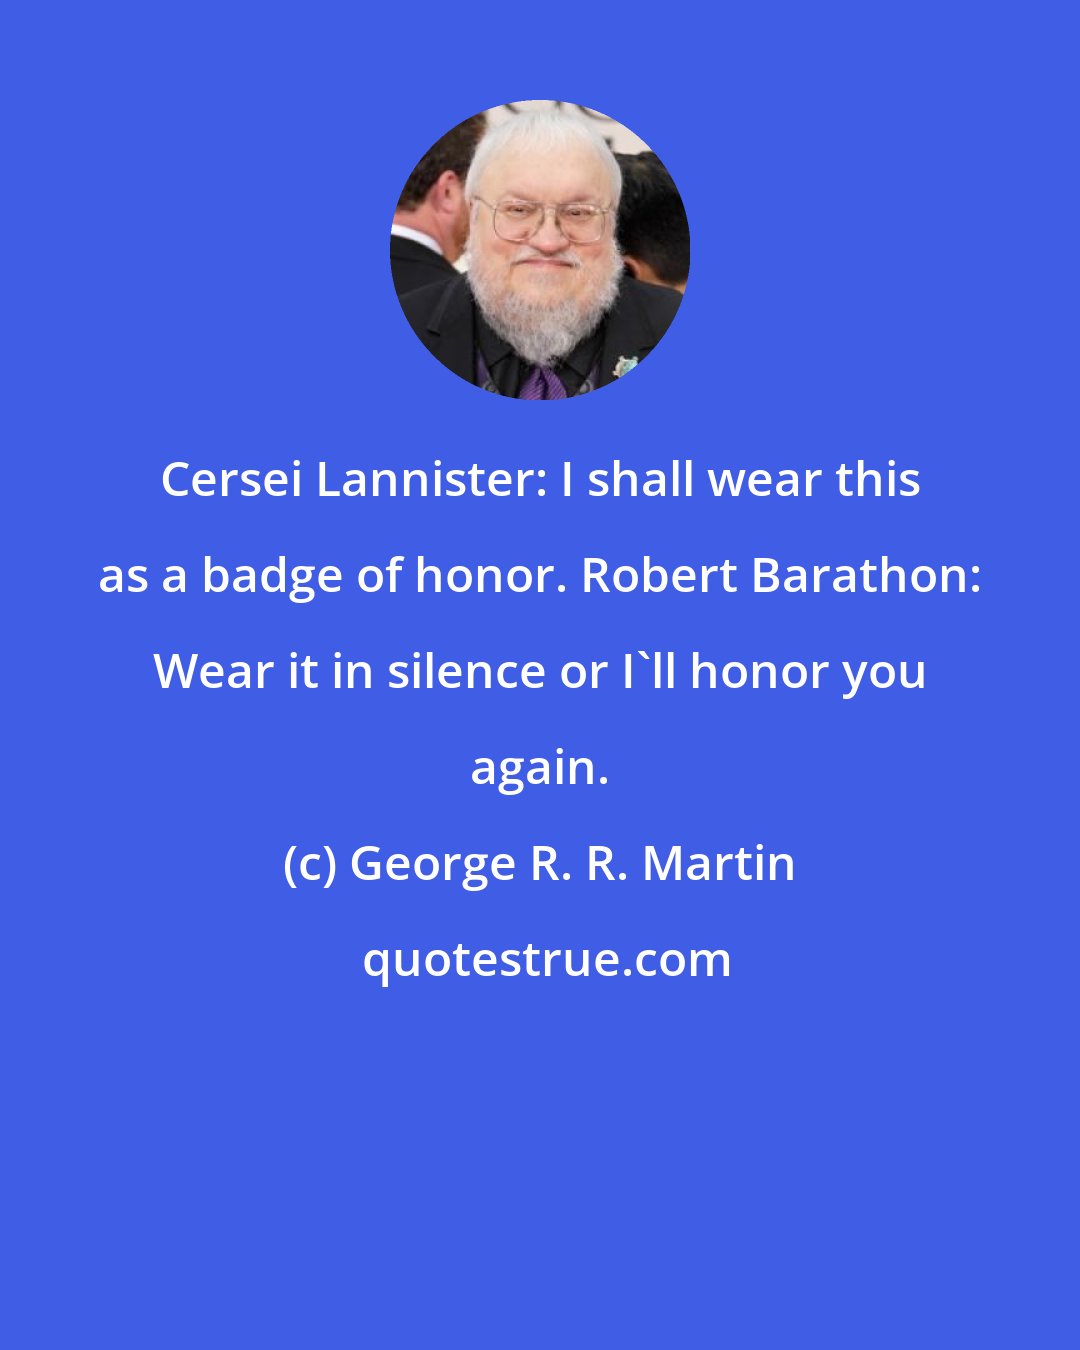 George R. R. Martin: Cersei Lannister: I shall wear this as a badge of honor. Robert Barathon: Wear it in silence or I'll honor you again.